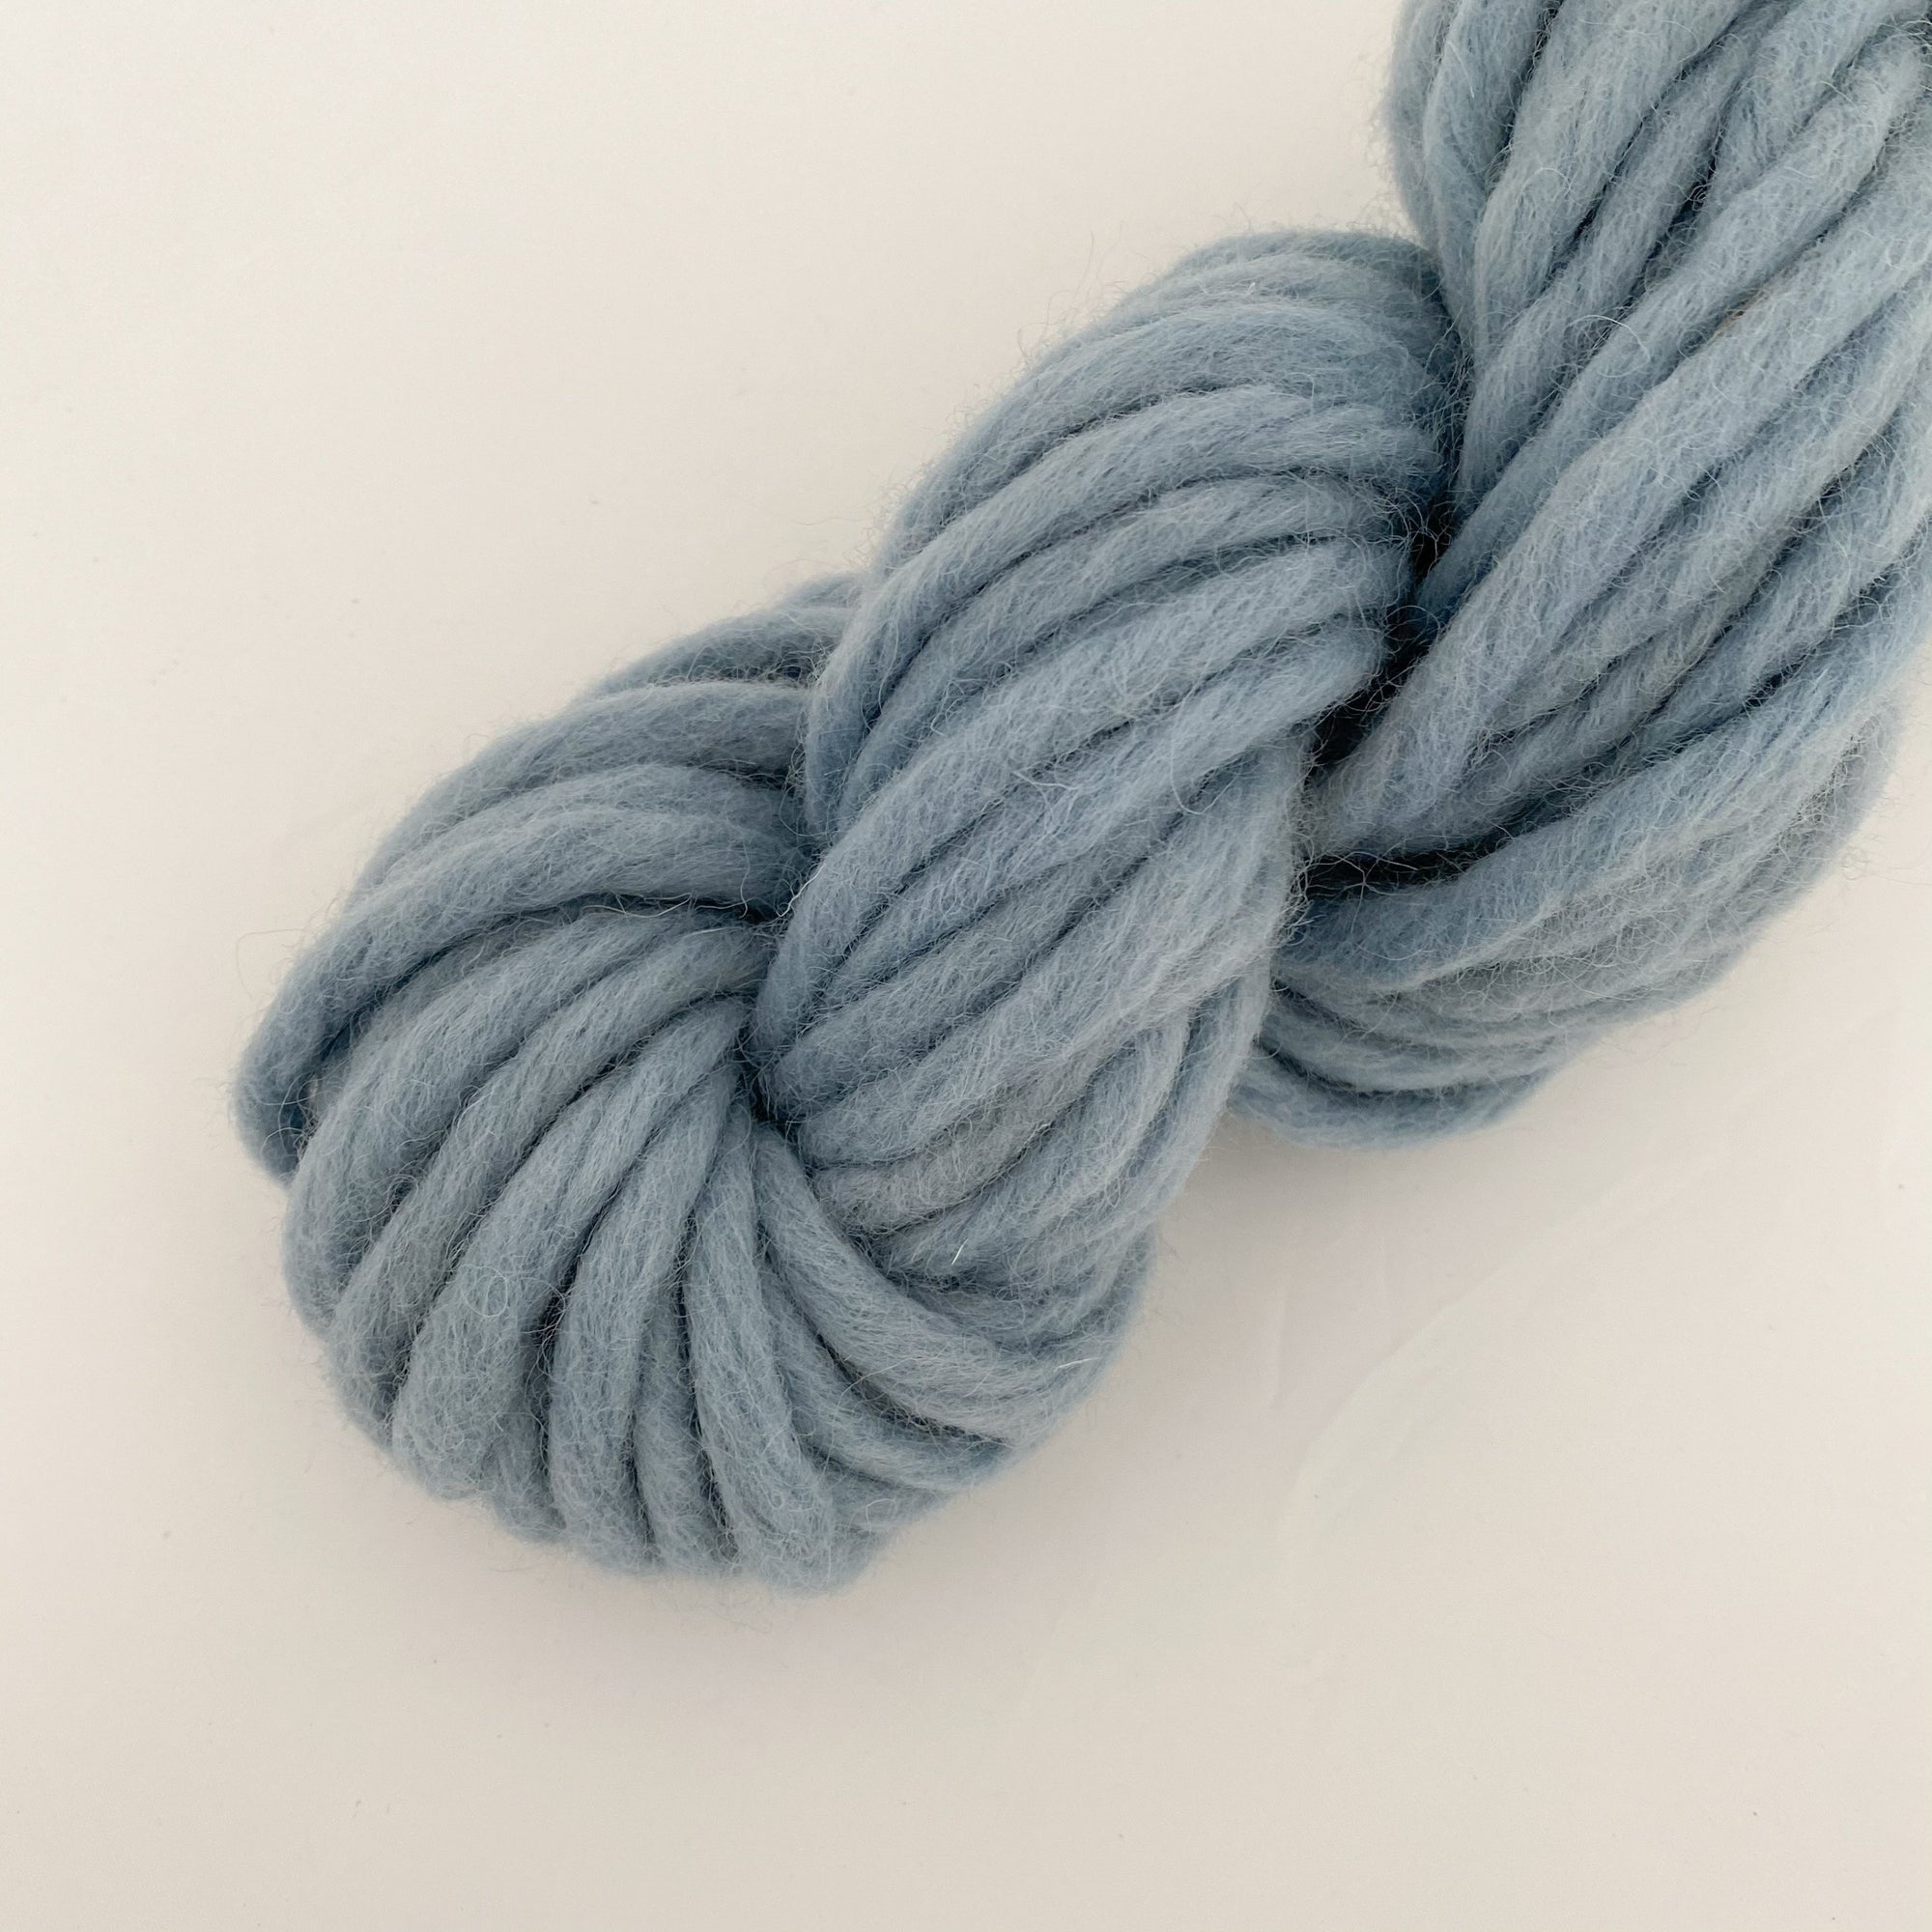 Mary Maker Studio speciality fibre Vintage Blue Felted Finger Rope macrame cotton macrame rope macrame workshop macrame patterns macrame